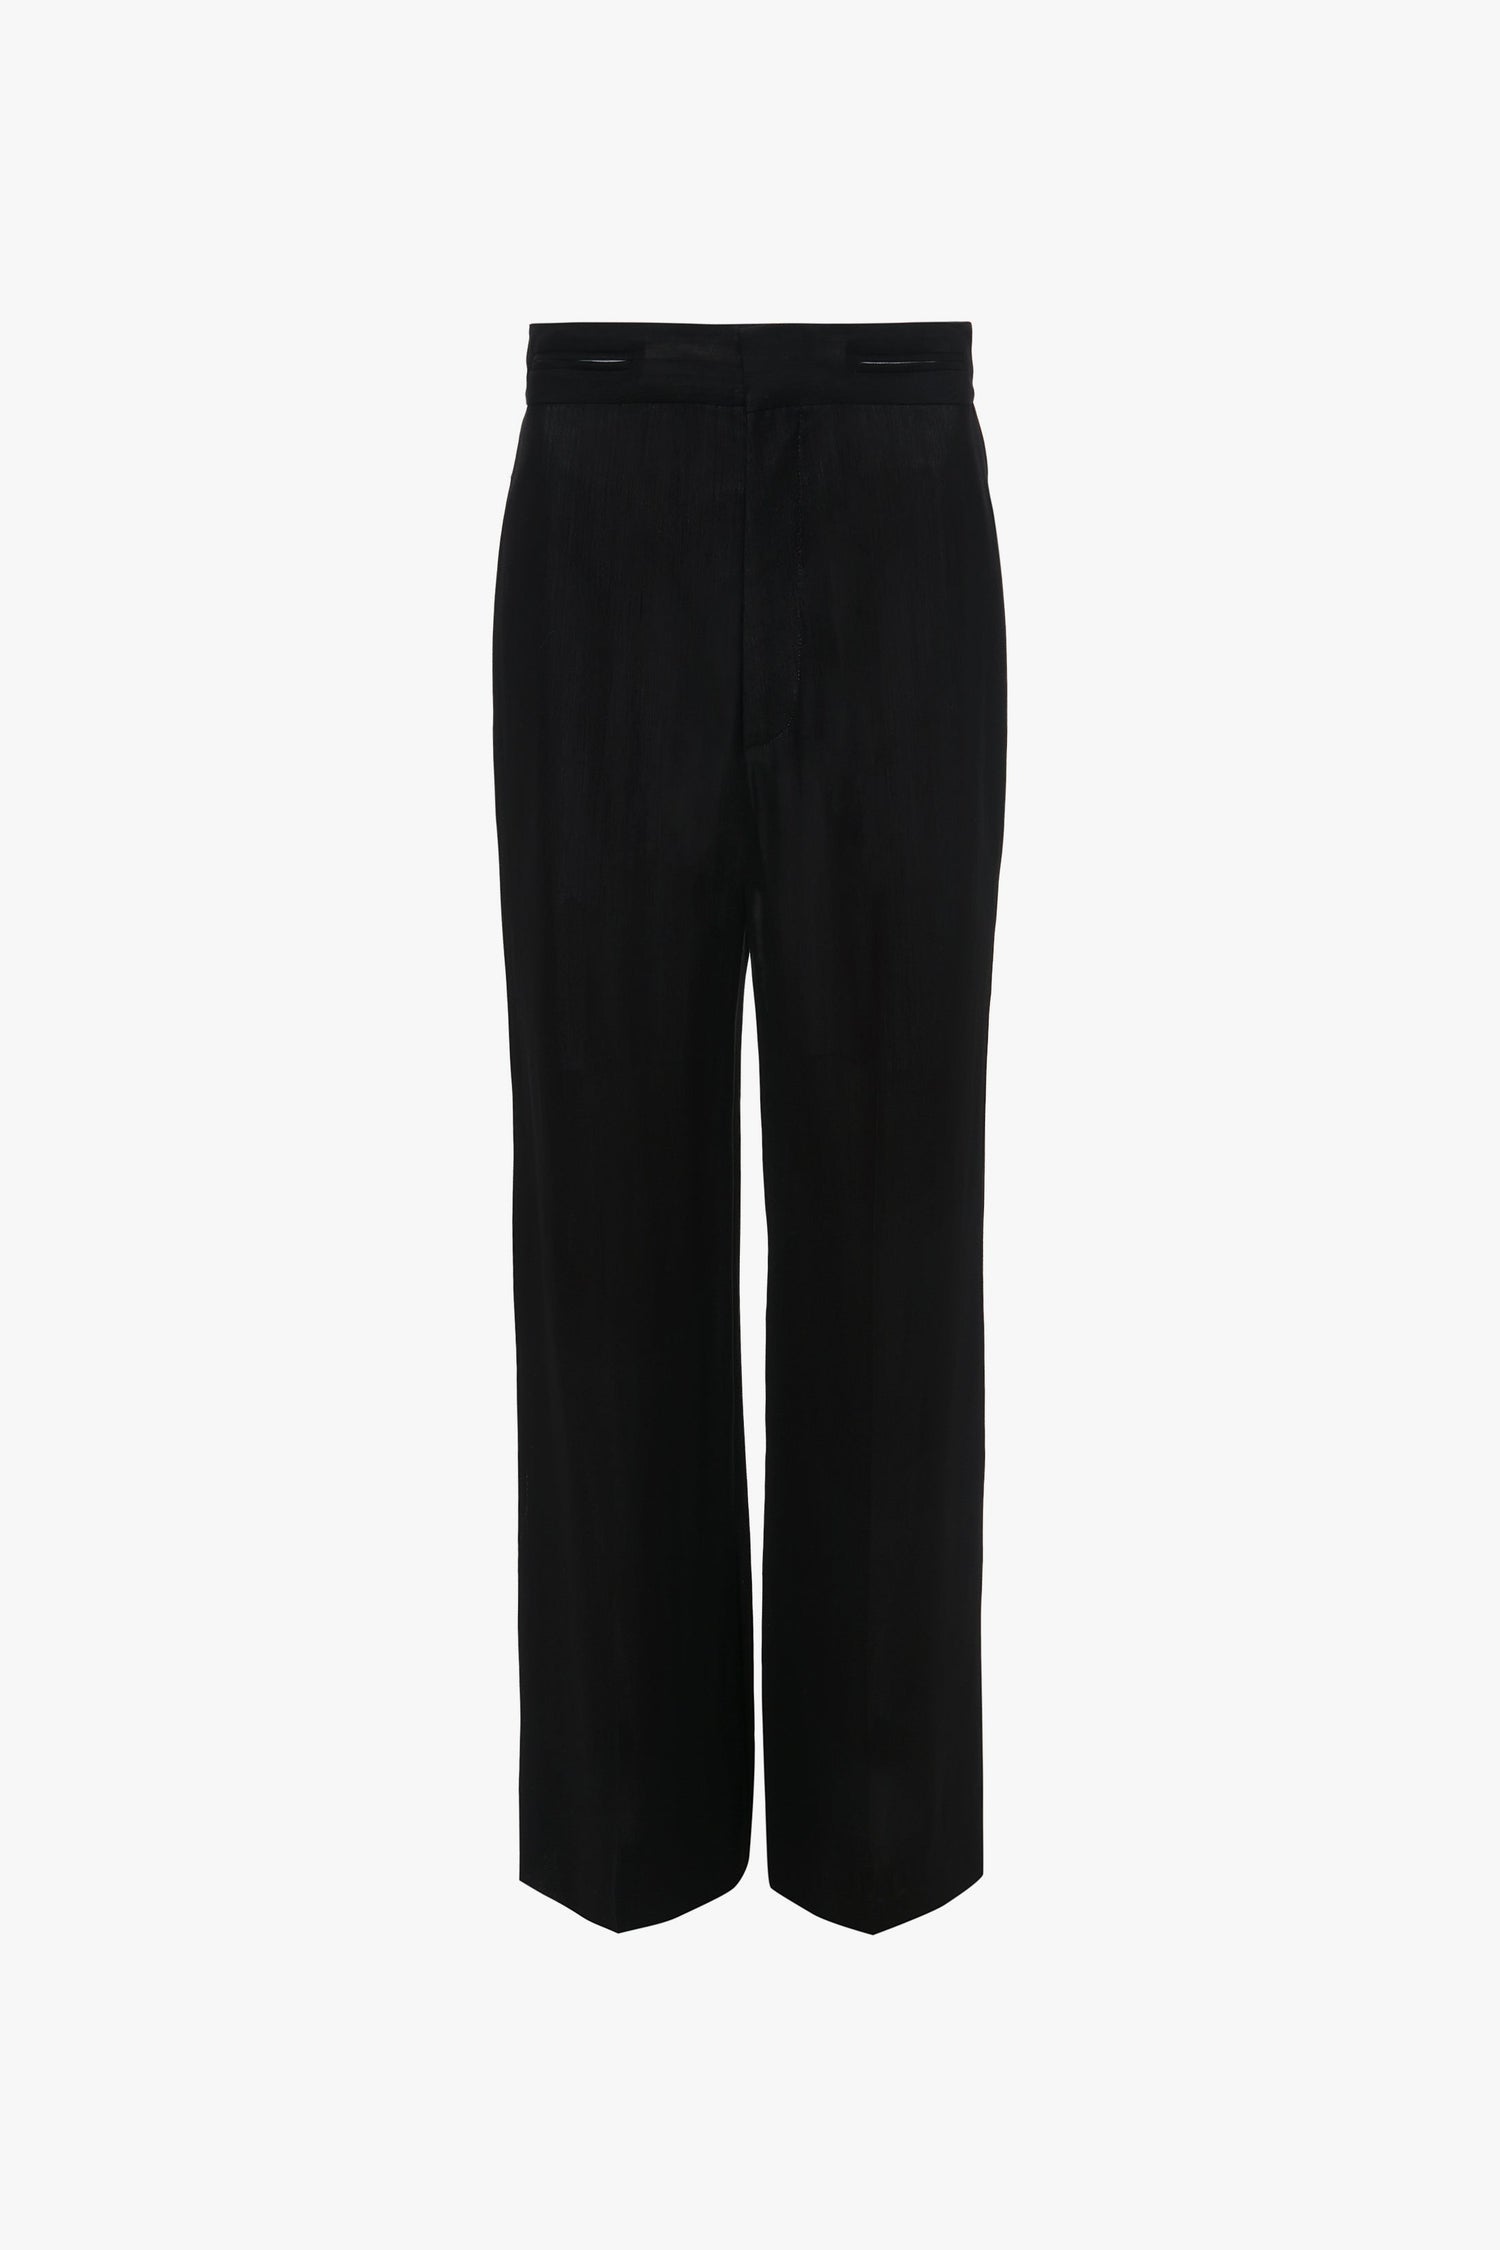 Victoria Beckham Waistband Detail Straight Leg Trouser in Black isolated on a white background.